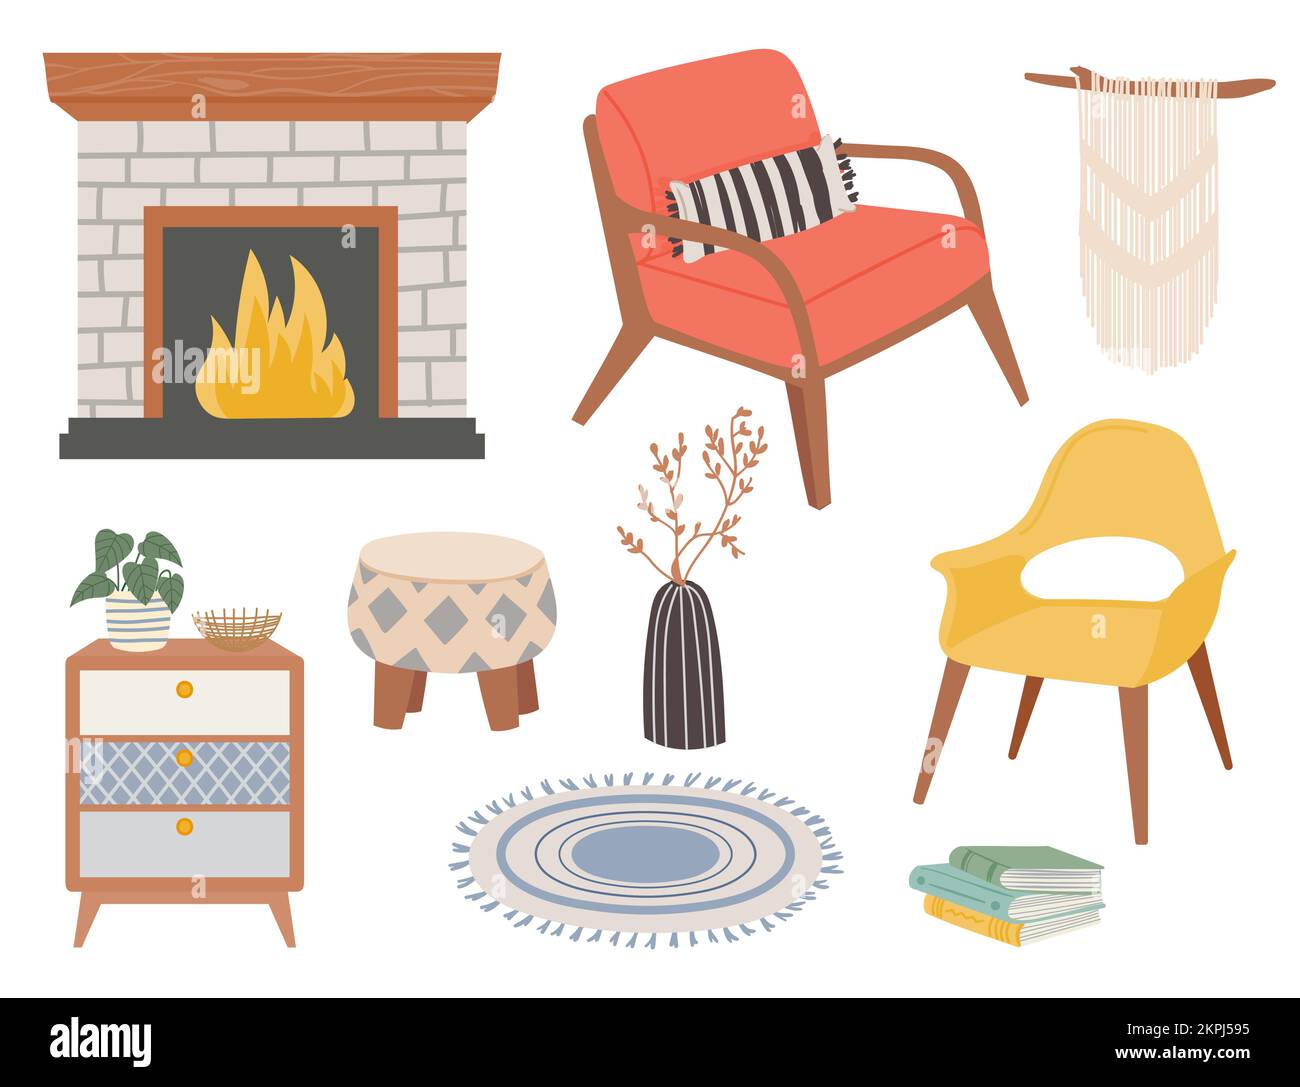 Scandinavian furniture. Minimalist furnishing for home decor. Living room interior objects in hygge style such as armchair, puff, carpet, fireplace, h Stock Vector